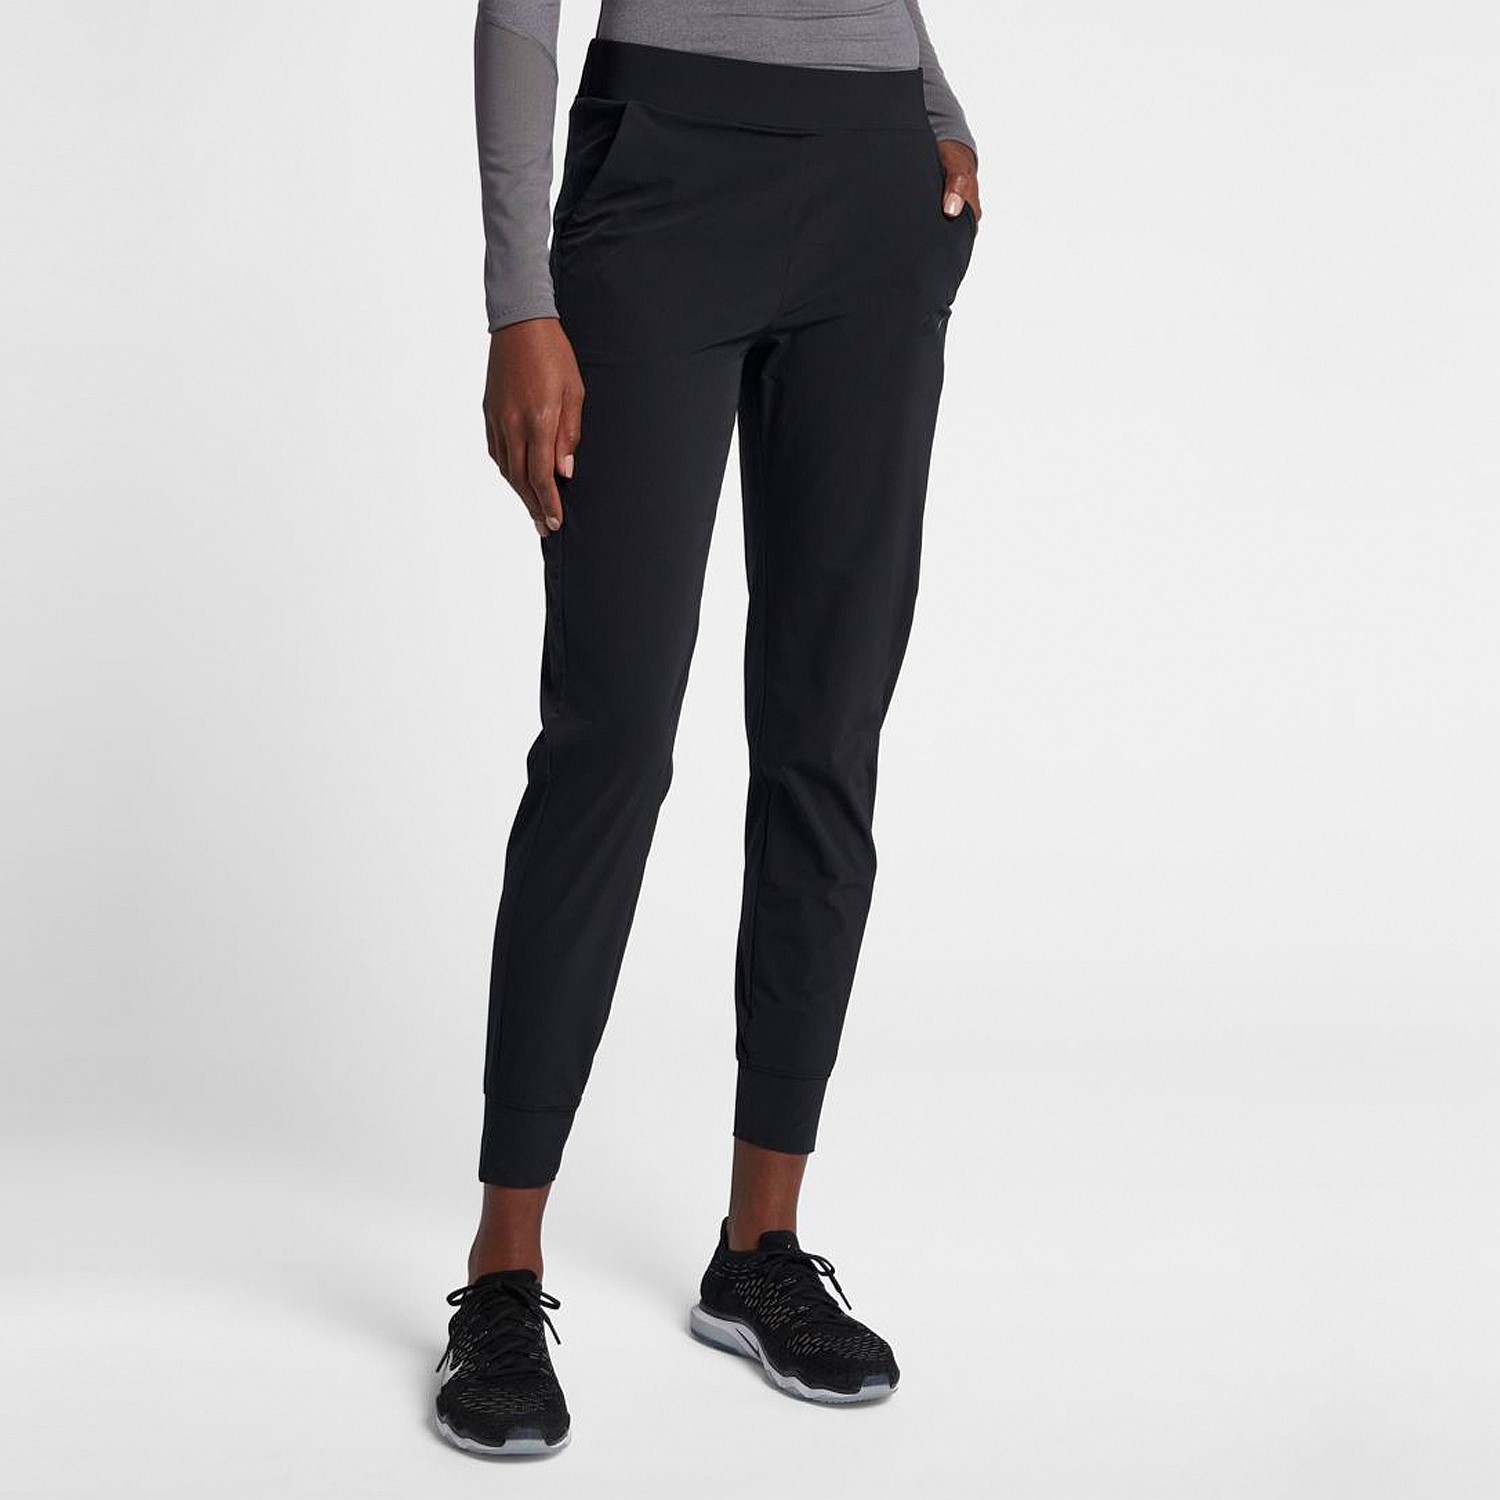 Lifestyle and Clothing | Stirling Sports - Lux Pant